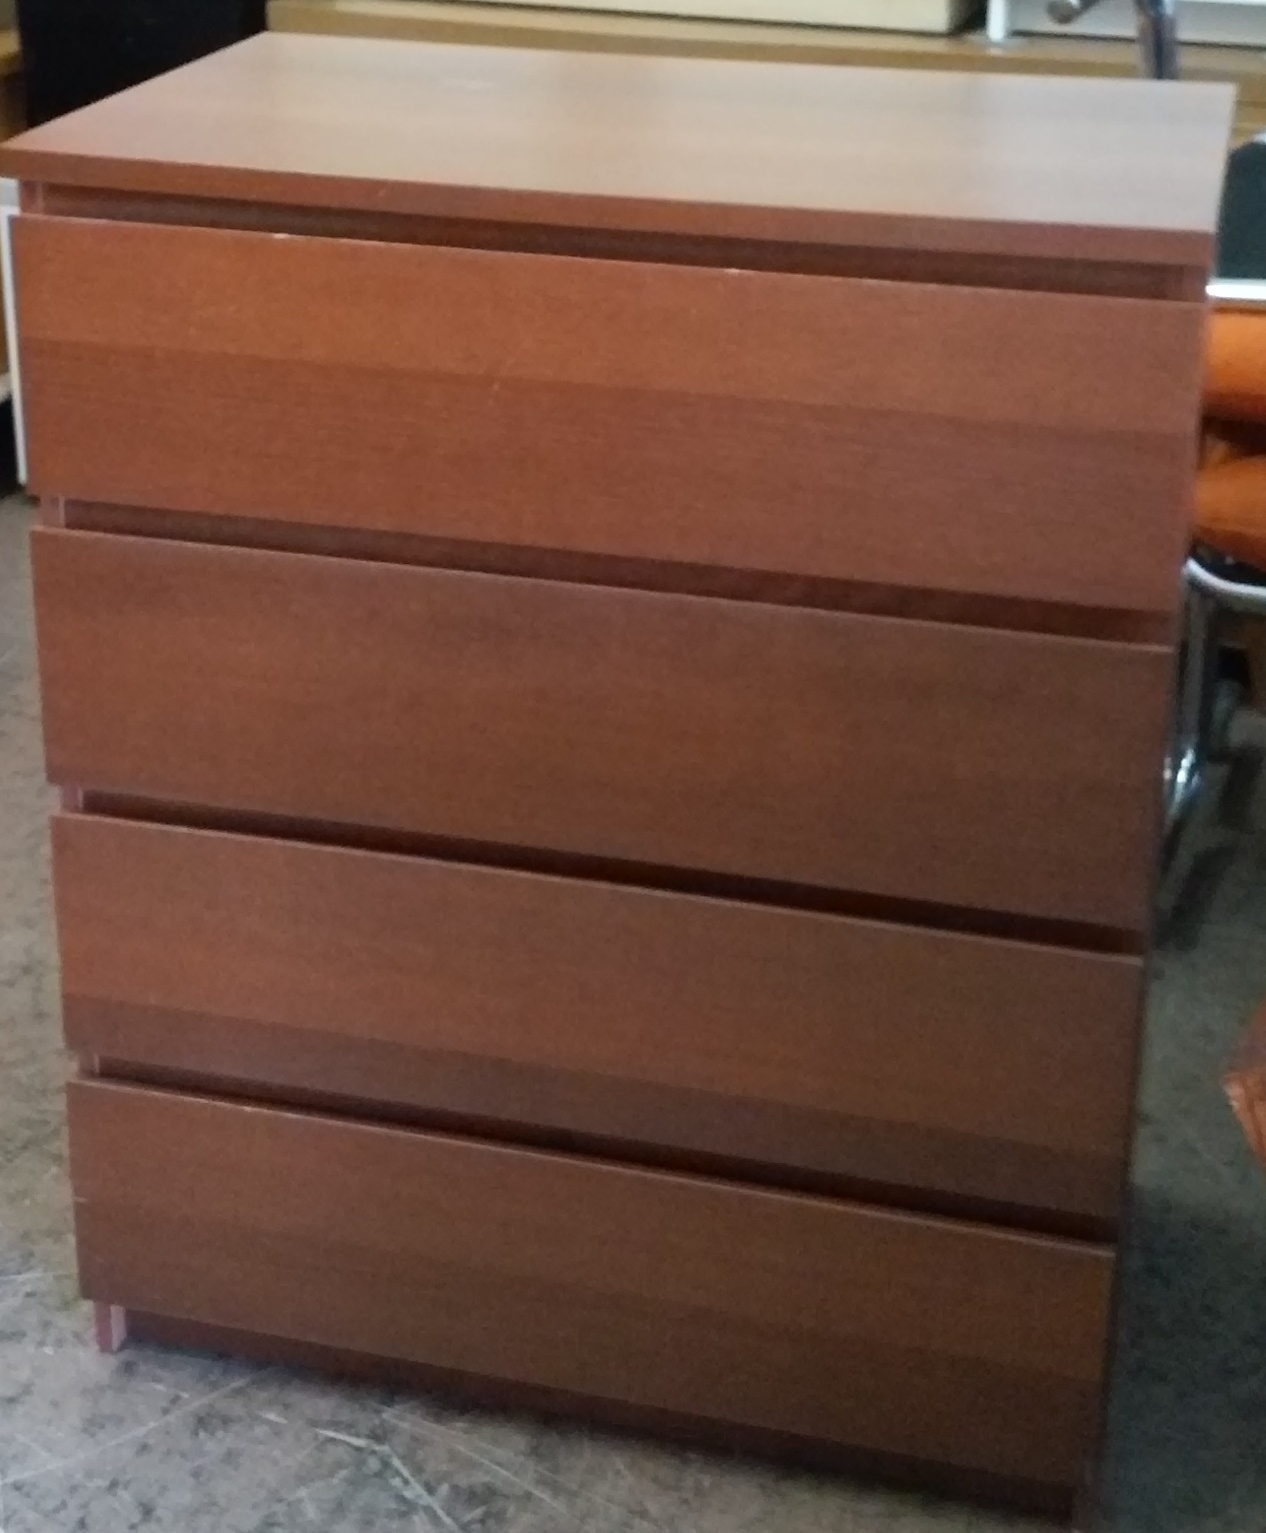 Uhuru Furniture Collectibles Sold Ikea Malm 4 Drawer Chest 70